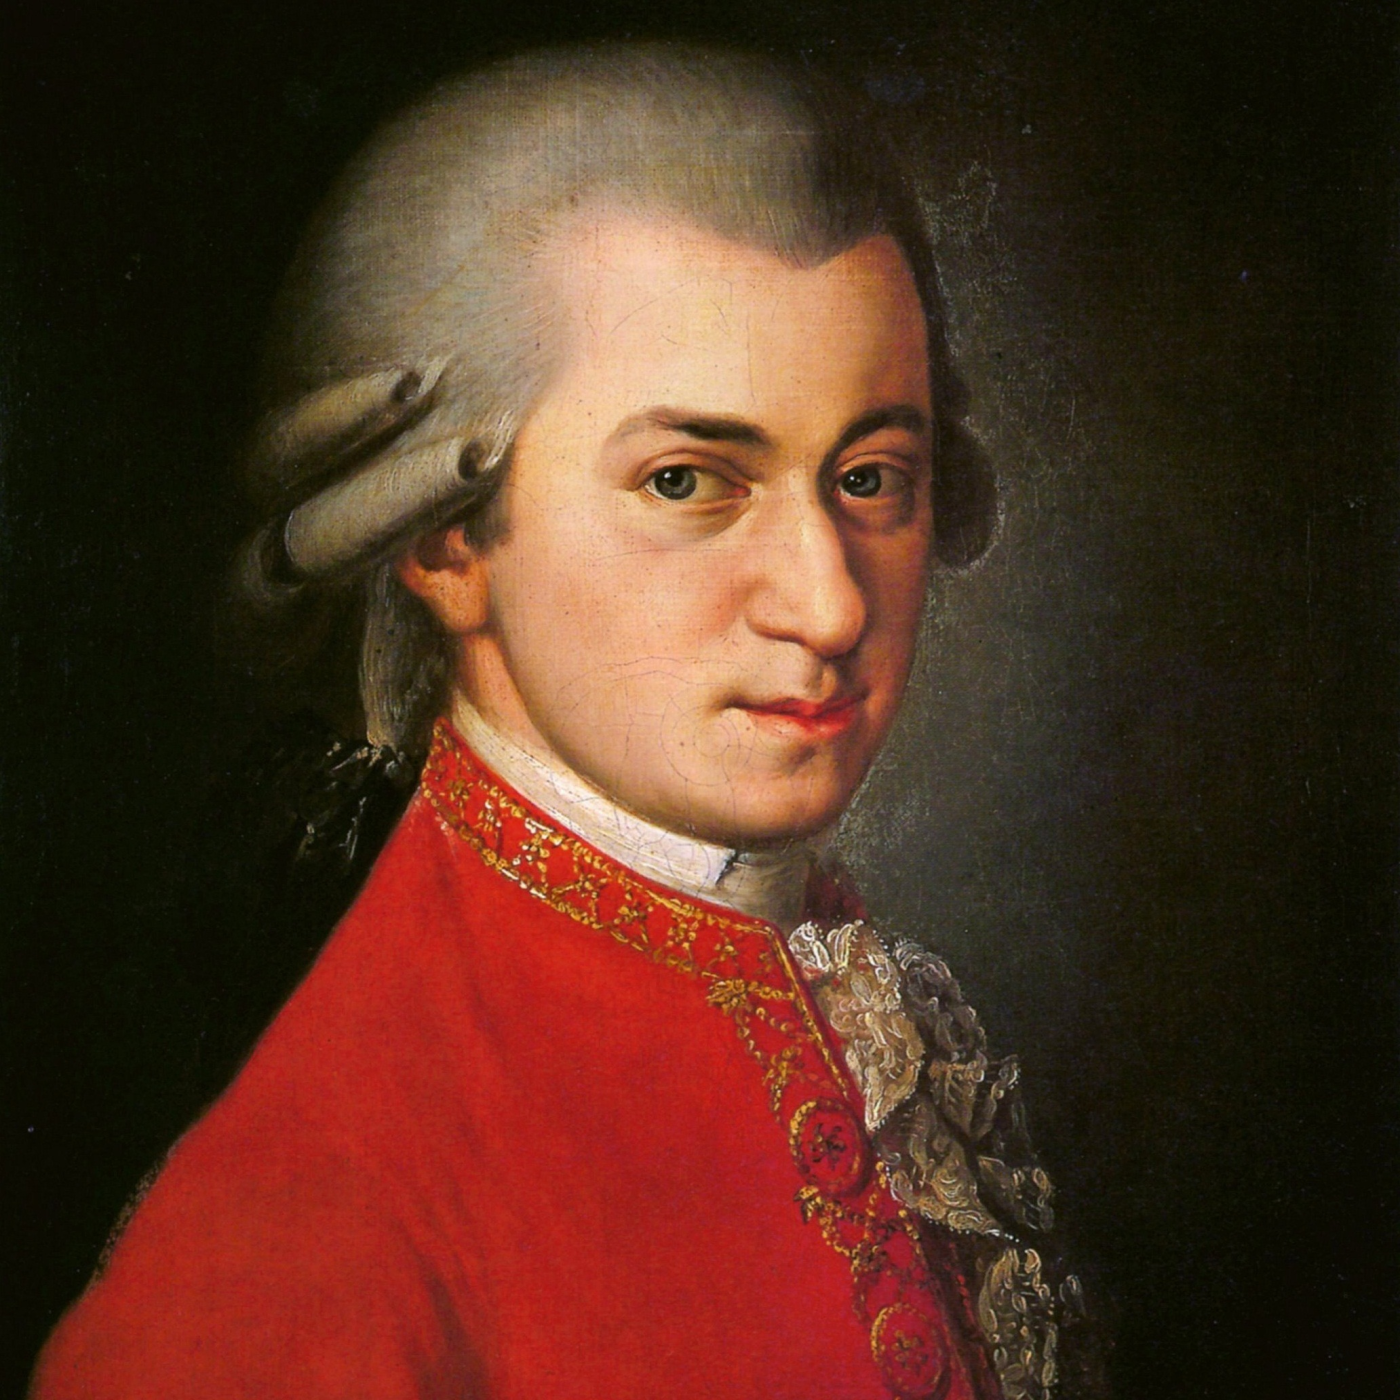 The life of Mozart